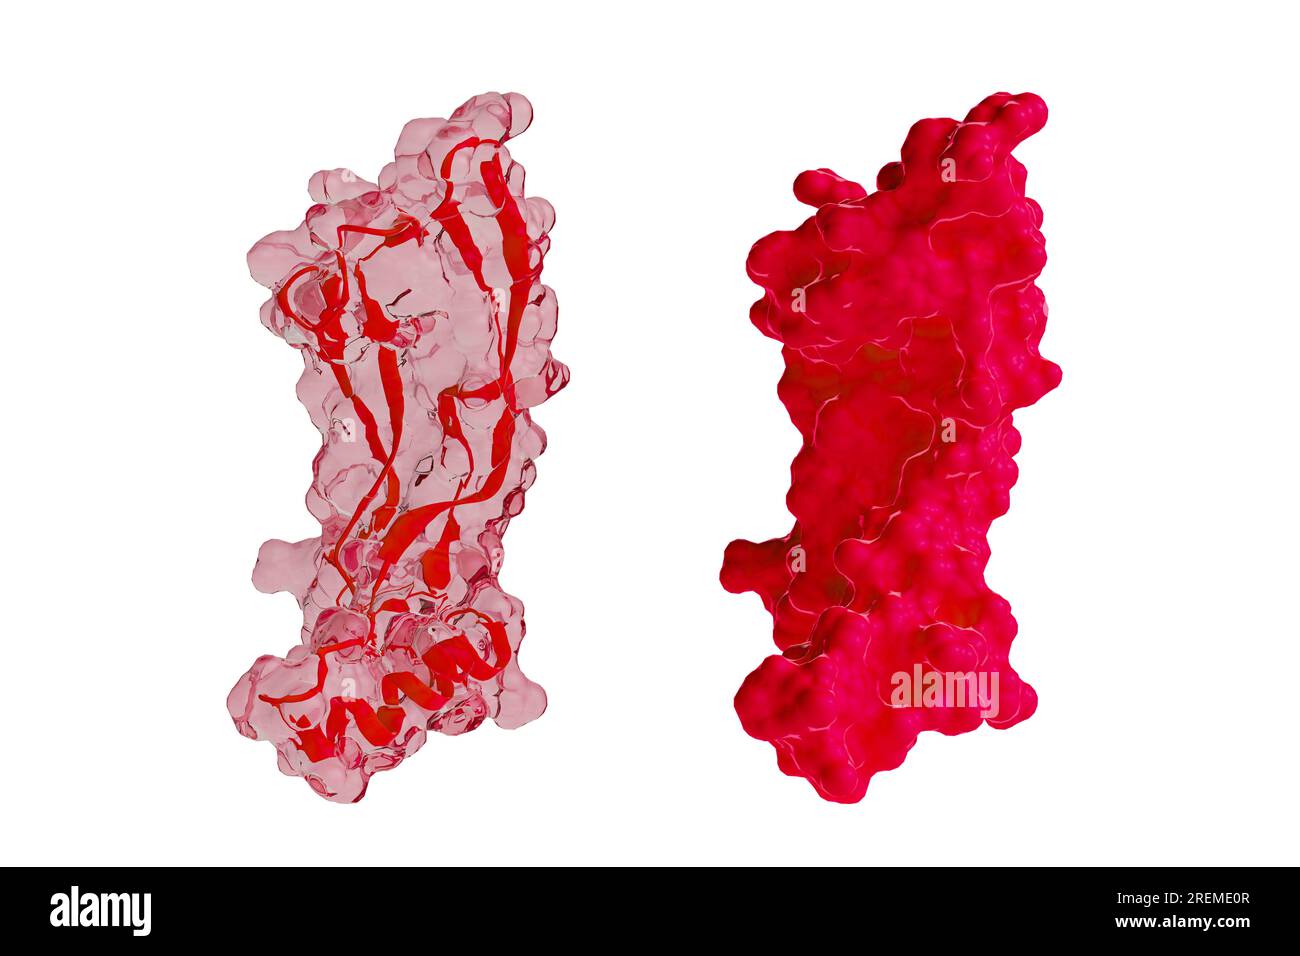 Illustration of human GDF15 (growth differentiation factor 15) protein showing transparent surface with internal ribbon models (left) and surface model in red (right). GDF15 is produced by organs in response to stress and is also found at high levels in the placenta. It has been proposed to contribute to morning sickness. Stock Photo